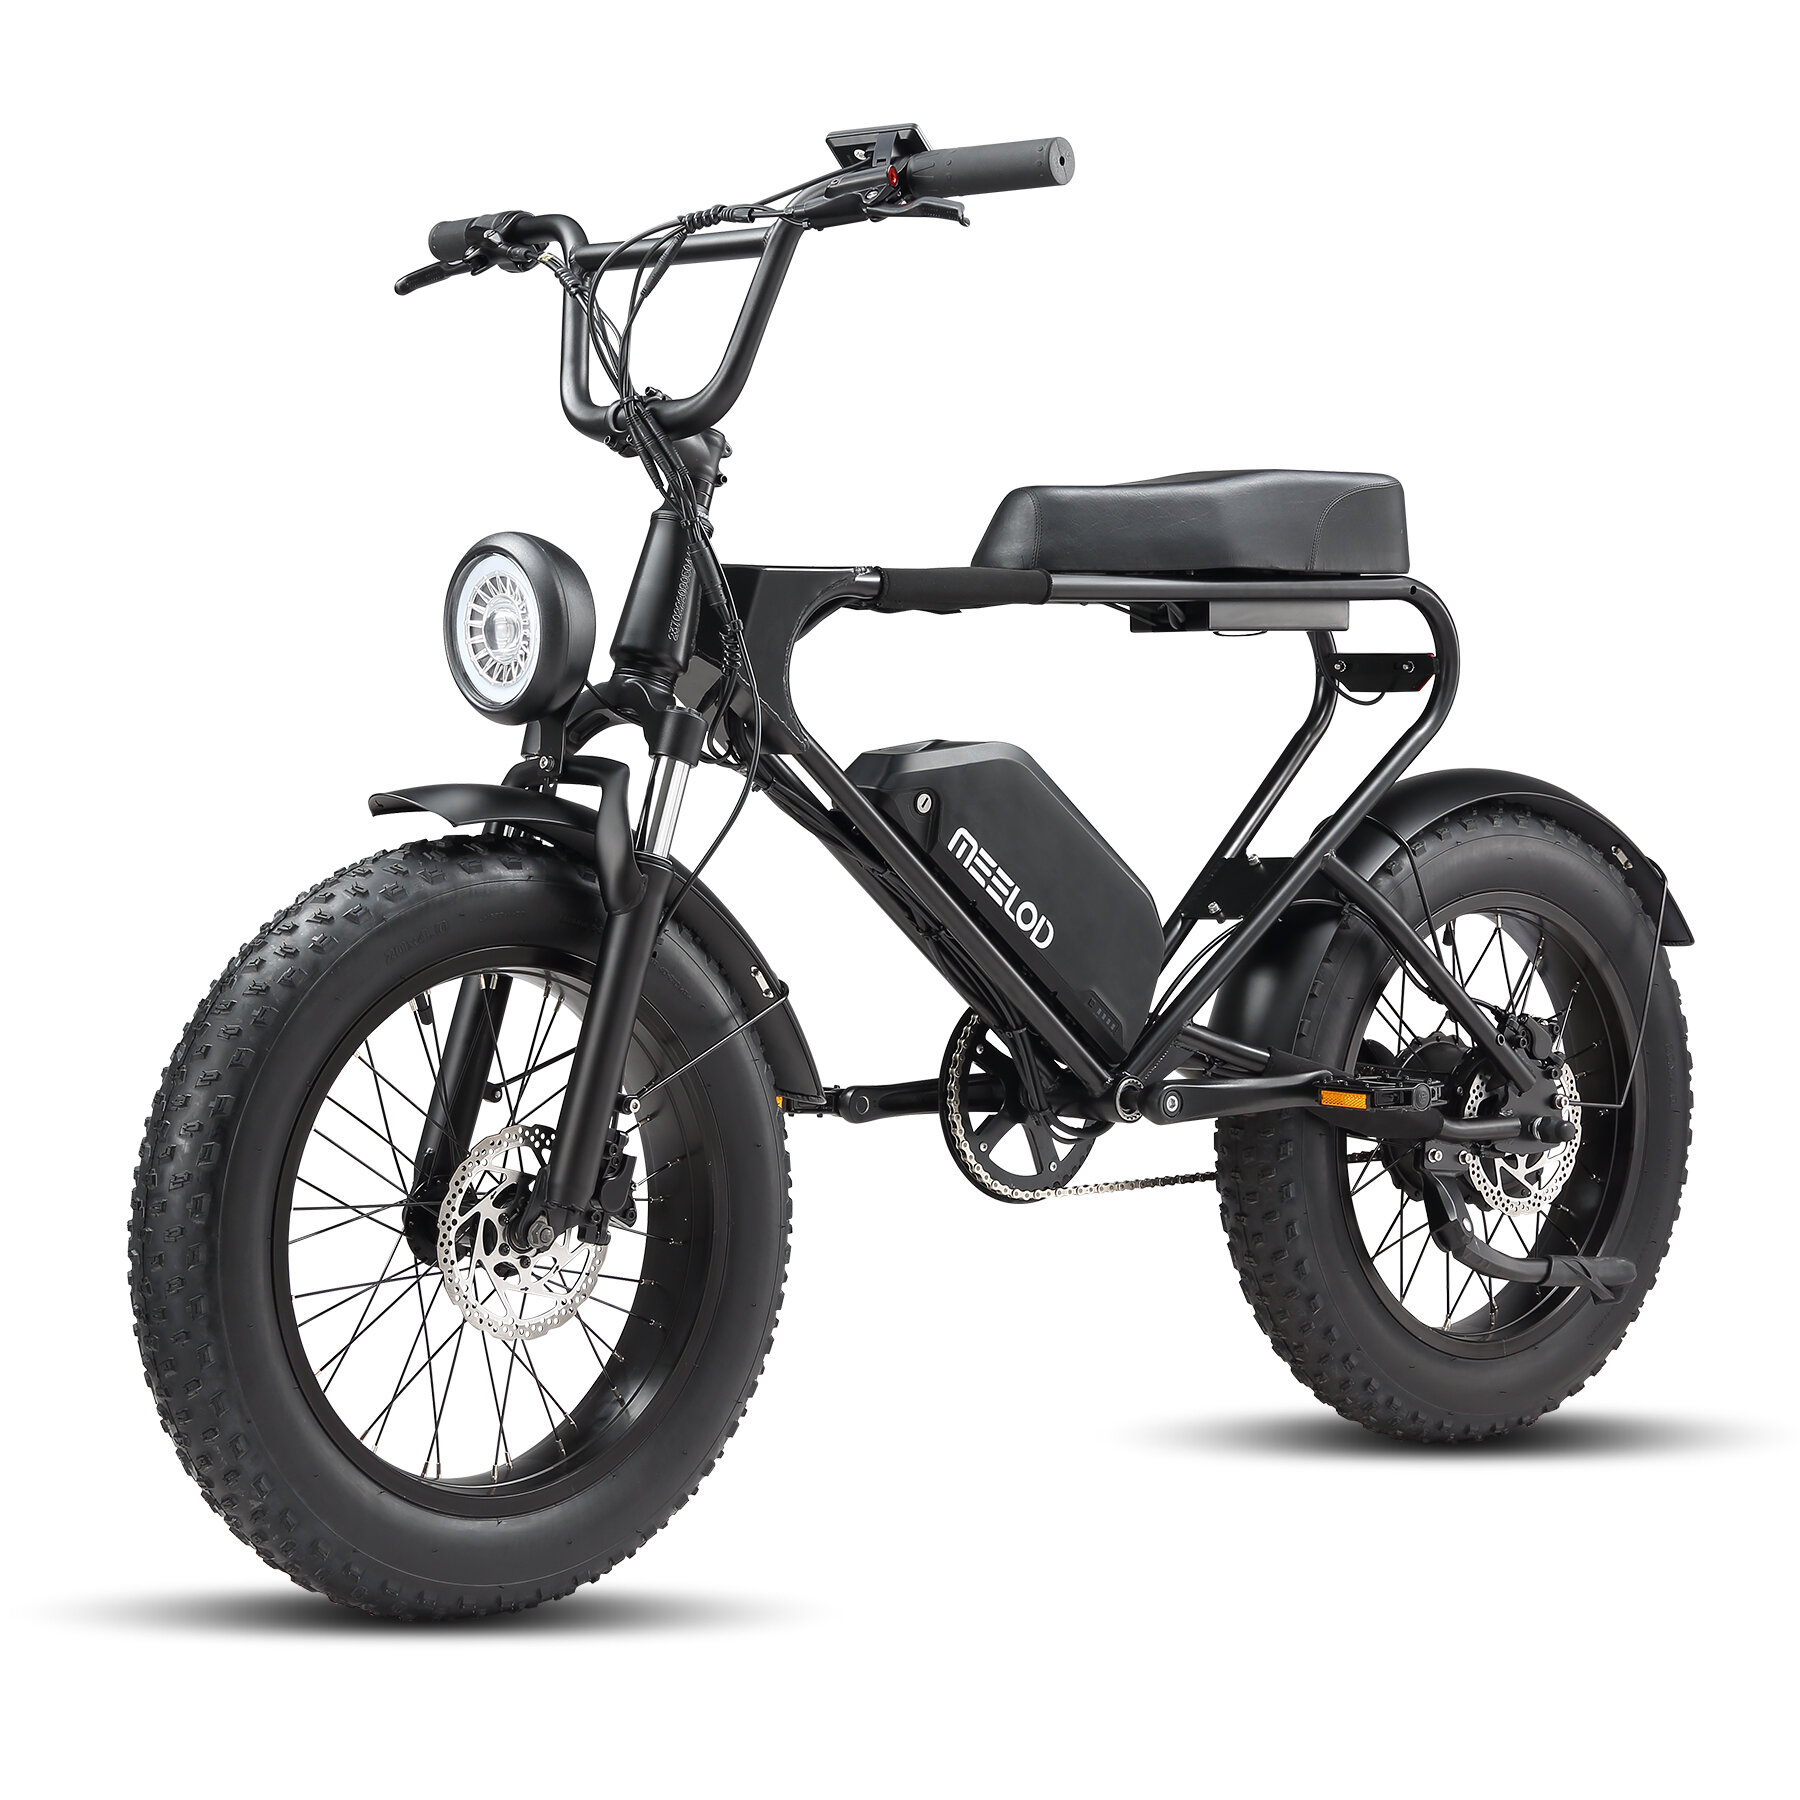 

[USA DIRECT] MEELOD DK200 Electric Bike 48V 13AH Battery 750W Motor 20inch Snow Tires 40-70KM Max Mileage 150KG Max Load